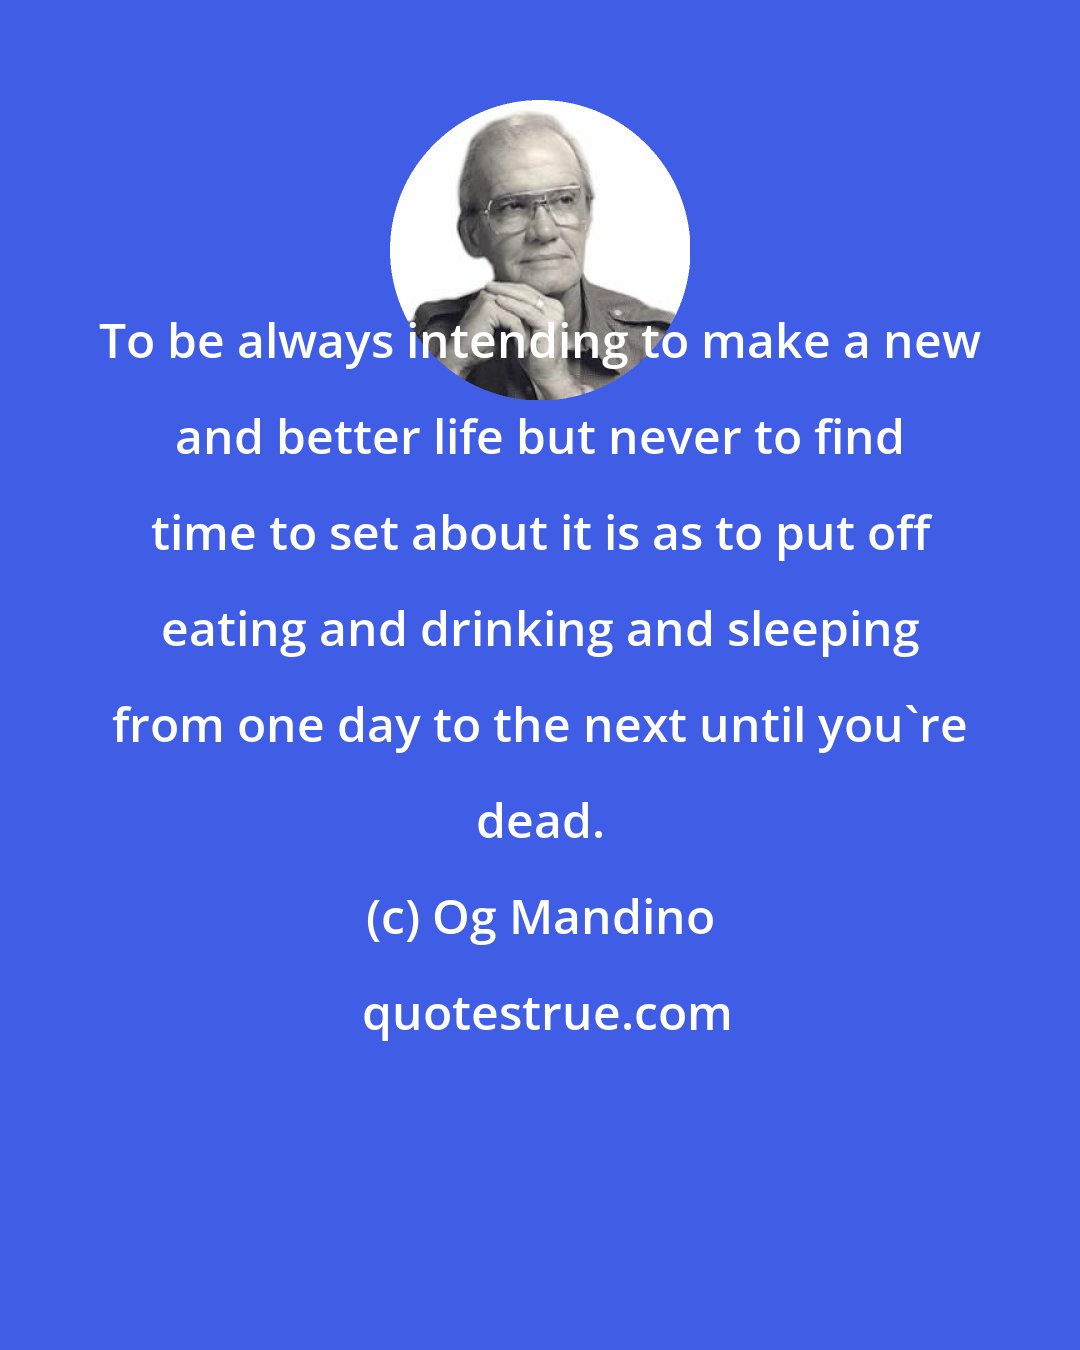 Og Mandino: To be always intending to make a new and better life but never to find time to set about it is as to put off eating and drinking and sleeping from one day to the next until you're dead.